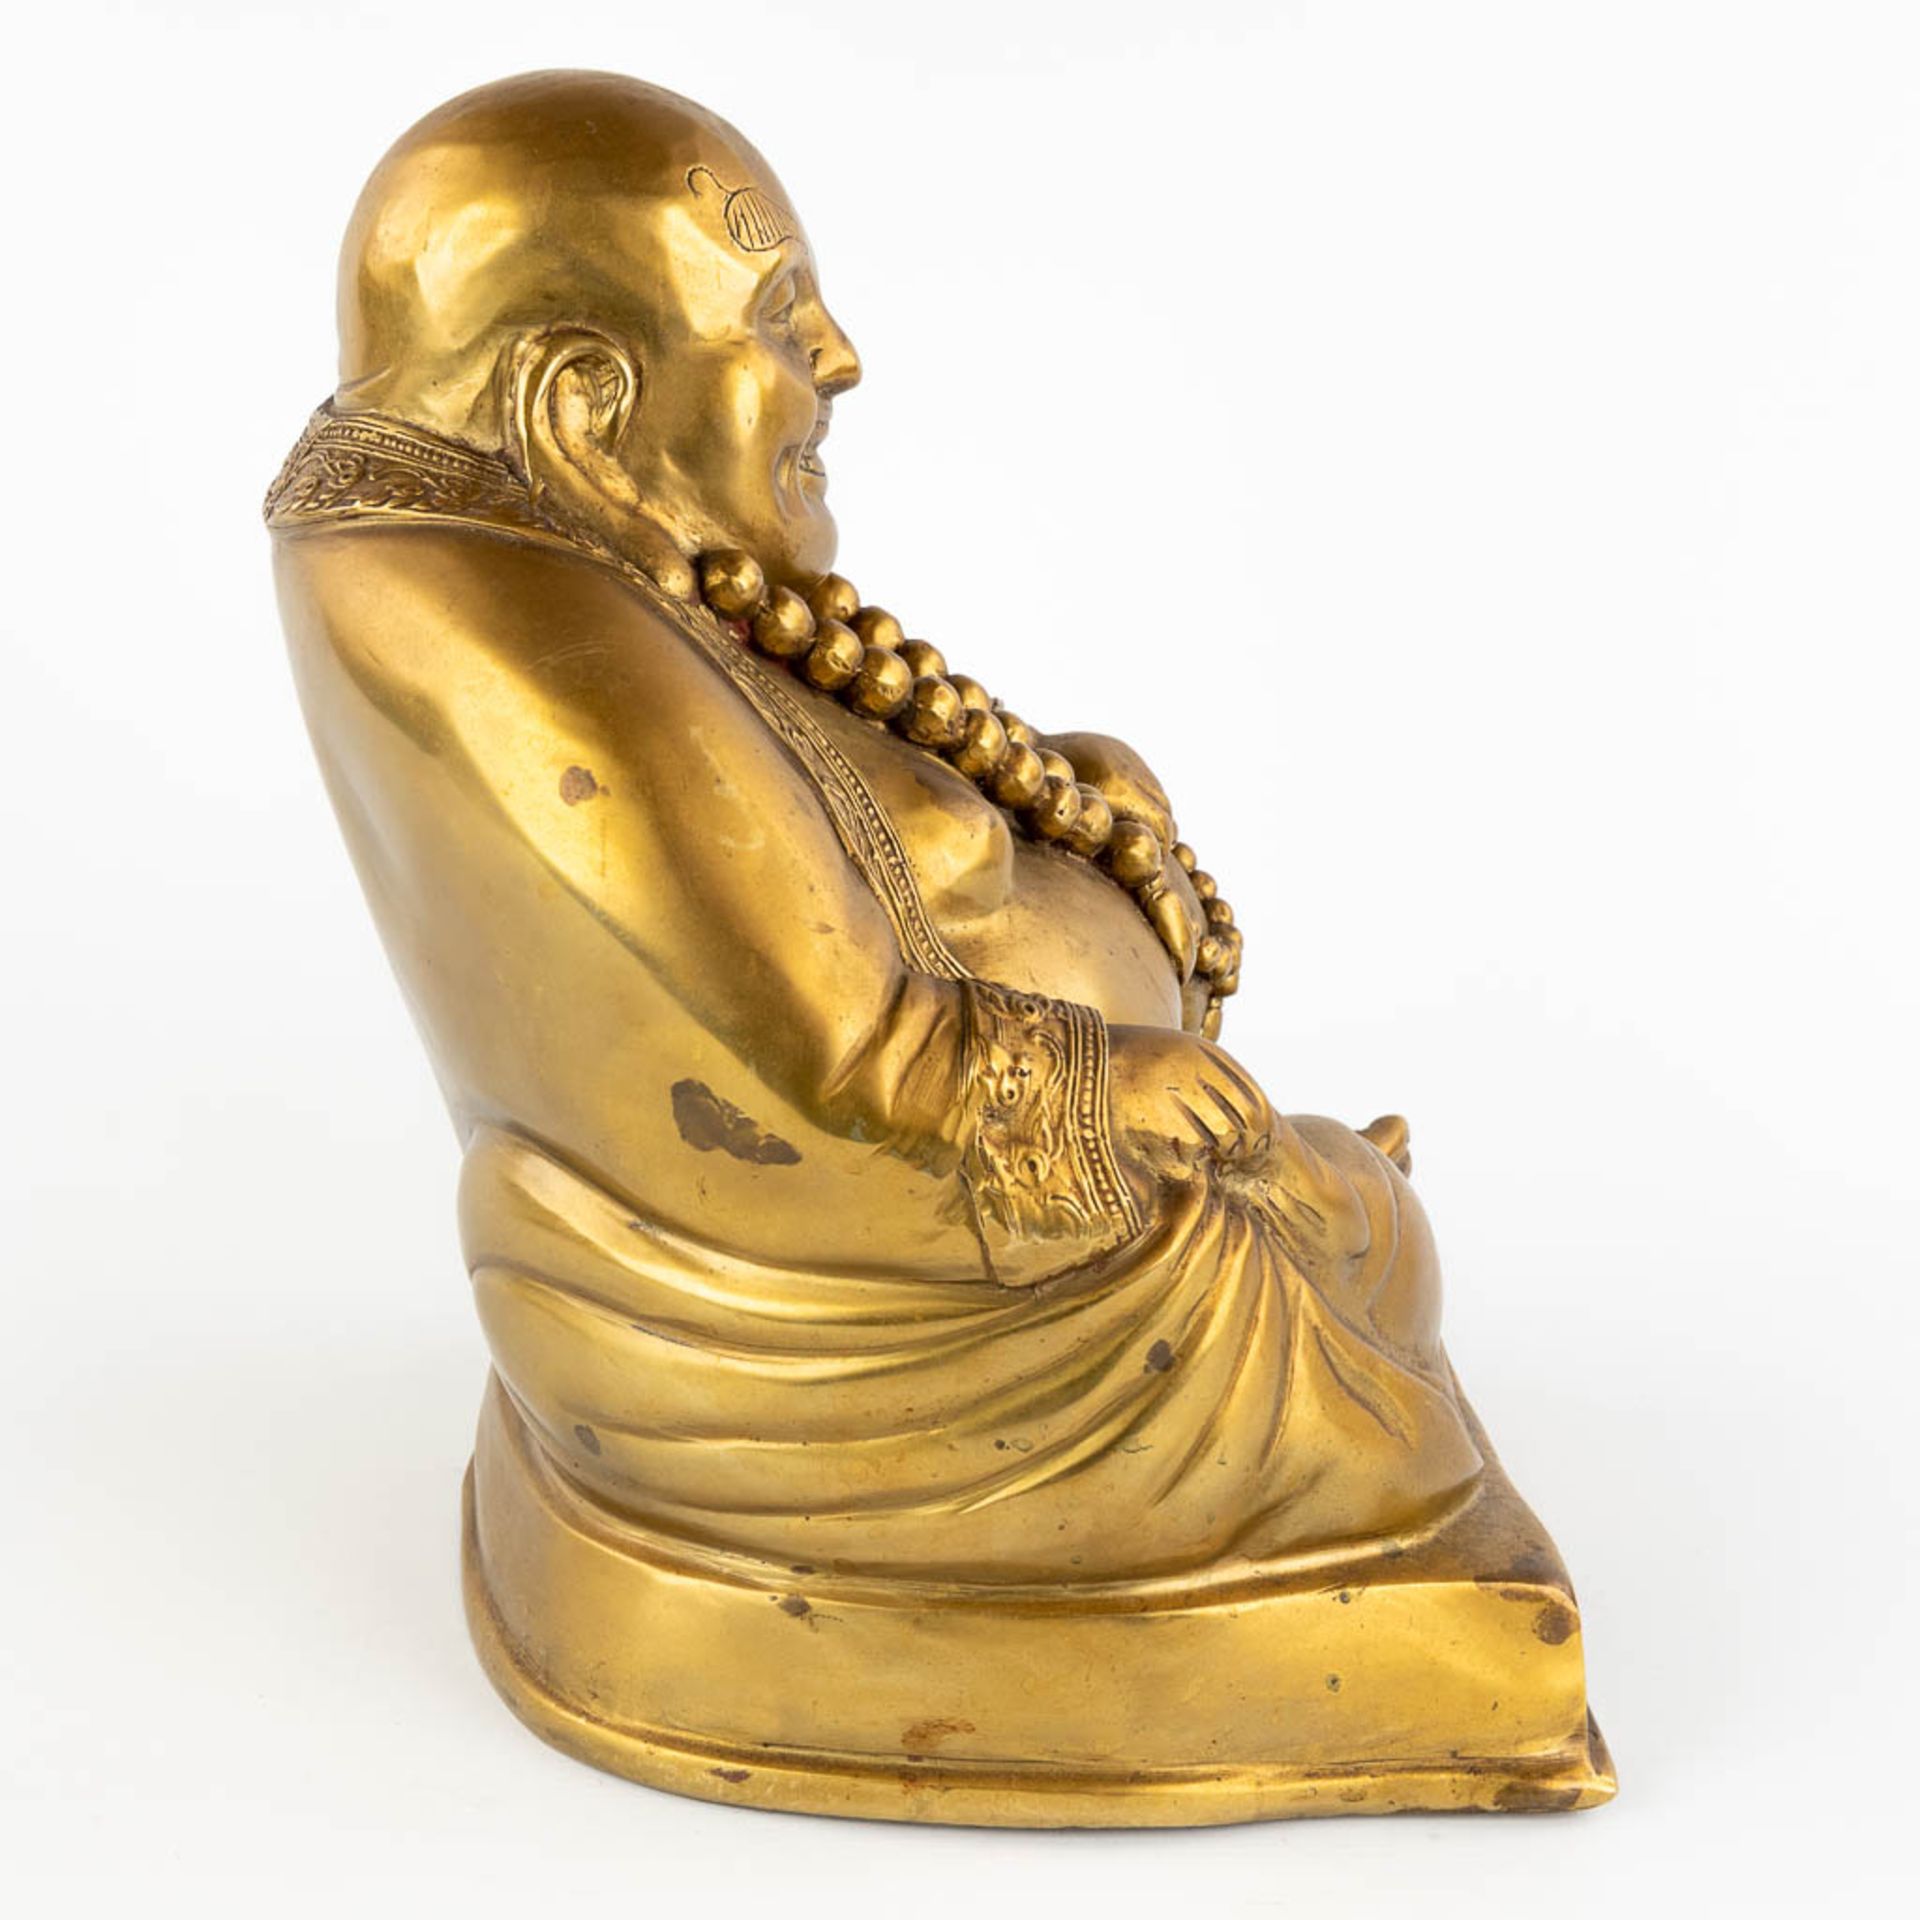 A Chinese laughing buddha, polished bronze. (L:27 x W:27 x H:34 cm) - Image 4 of 11